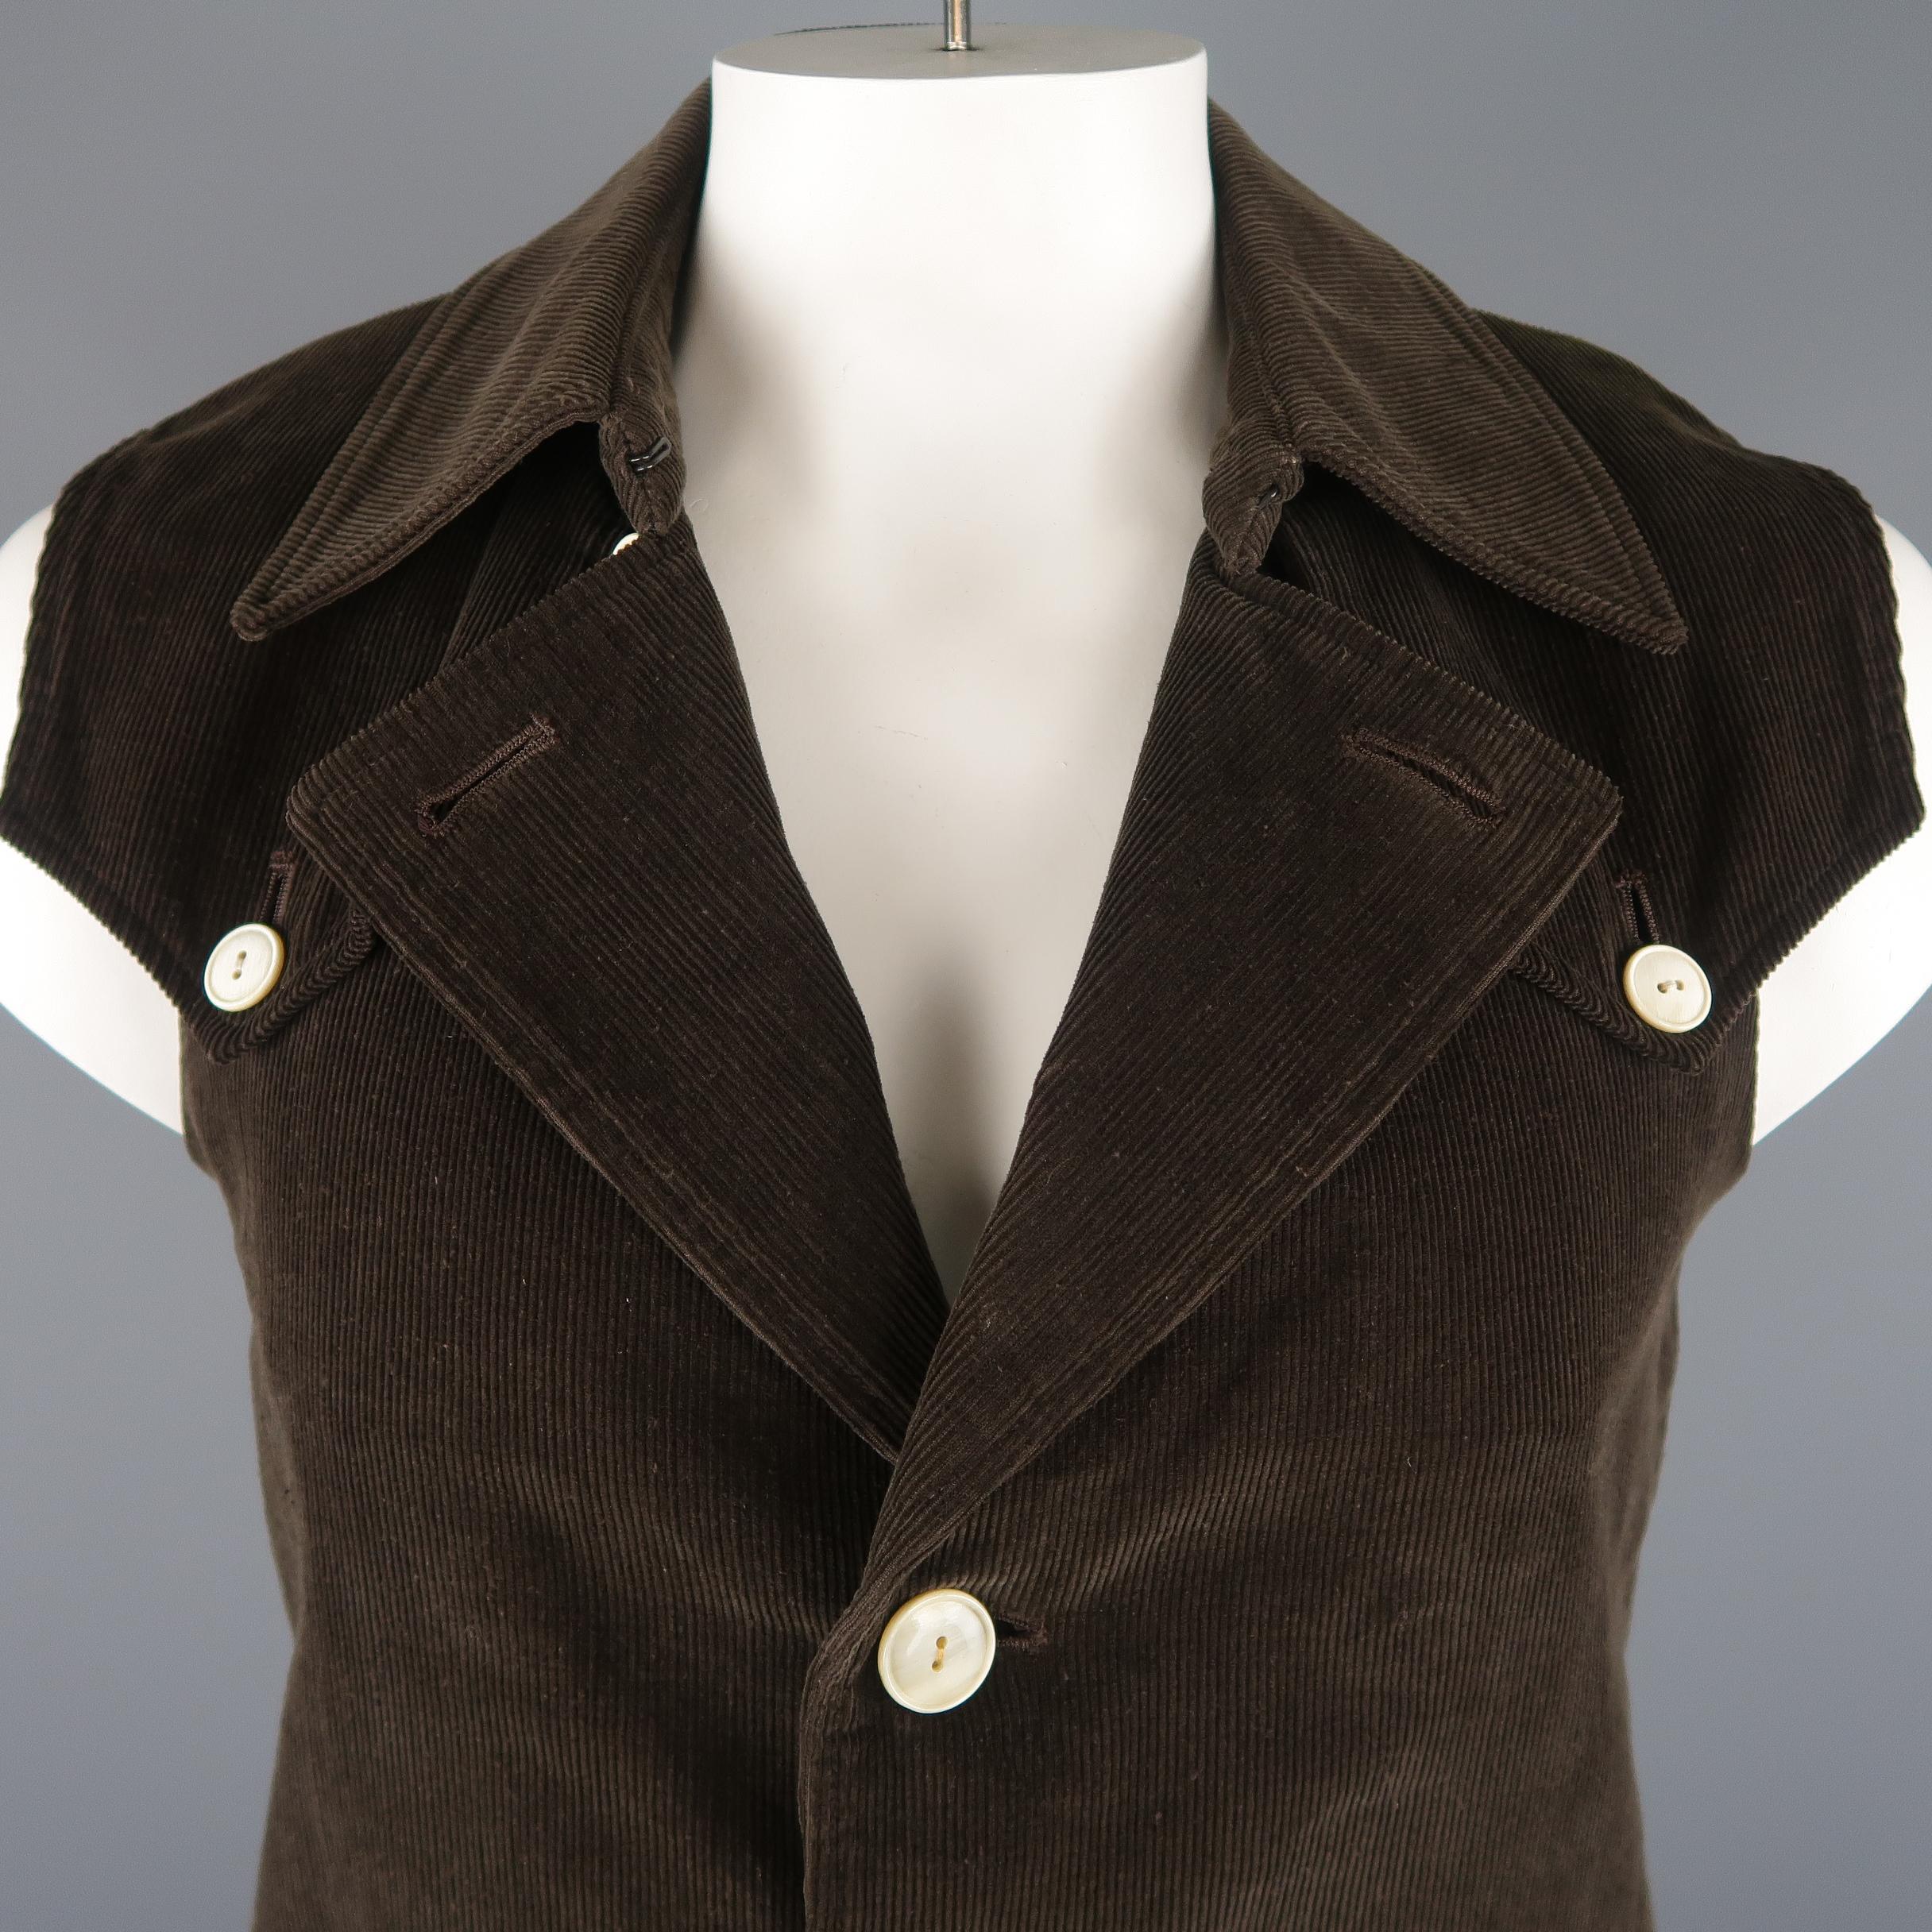 NUMBER (N)INE vest comes in brown tone in solid lightly distressed corduroy material, with a notch lapel, buttoned lapel, slit pockets, horn buttons and back belt. Made in Japan.
 
Excellent Pre-Owned Condition.
Marked: 3 JP
 
Measurements:
